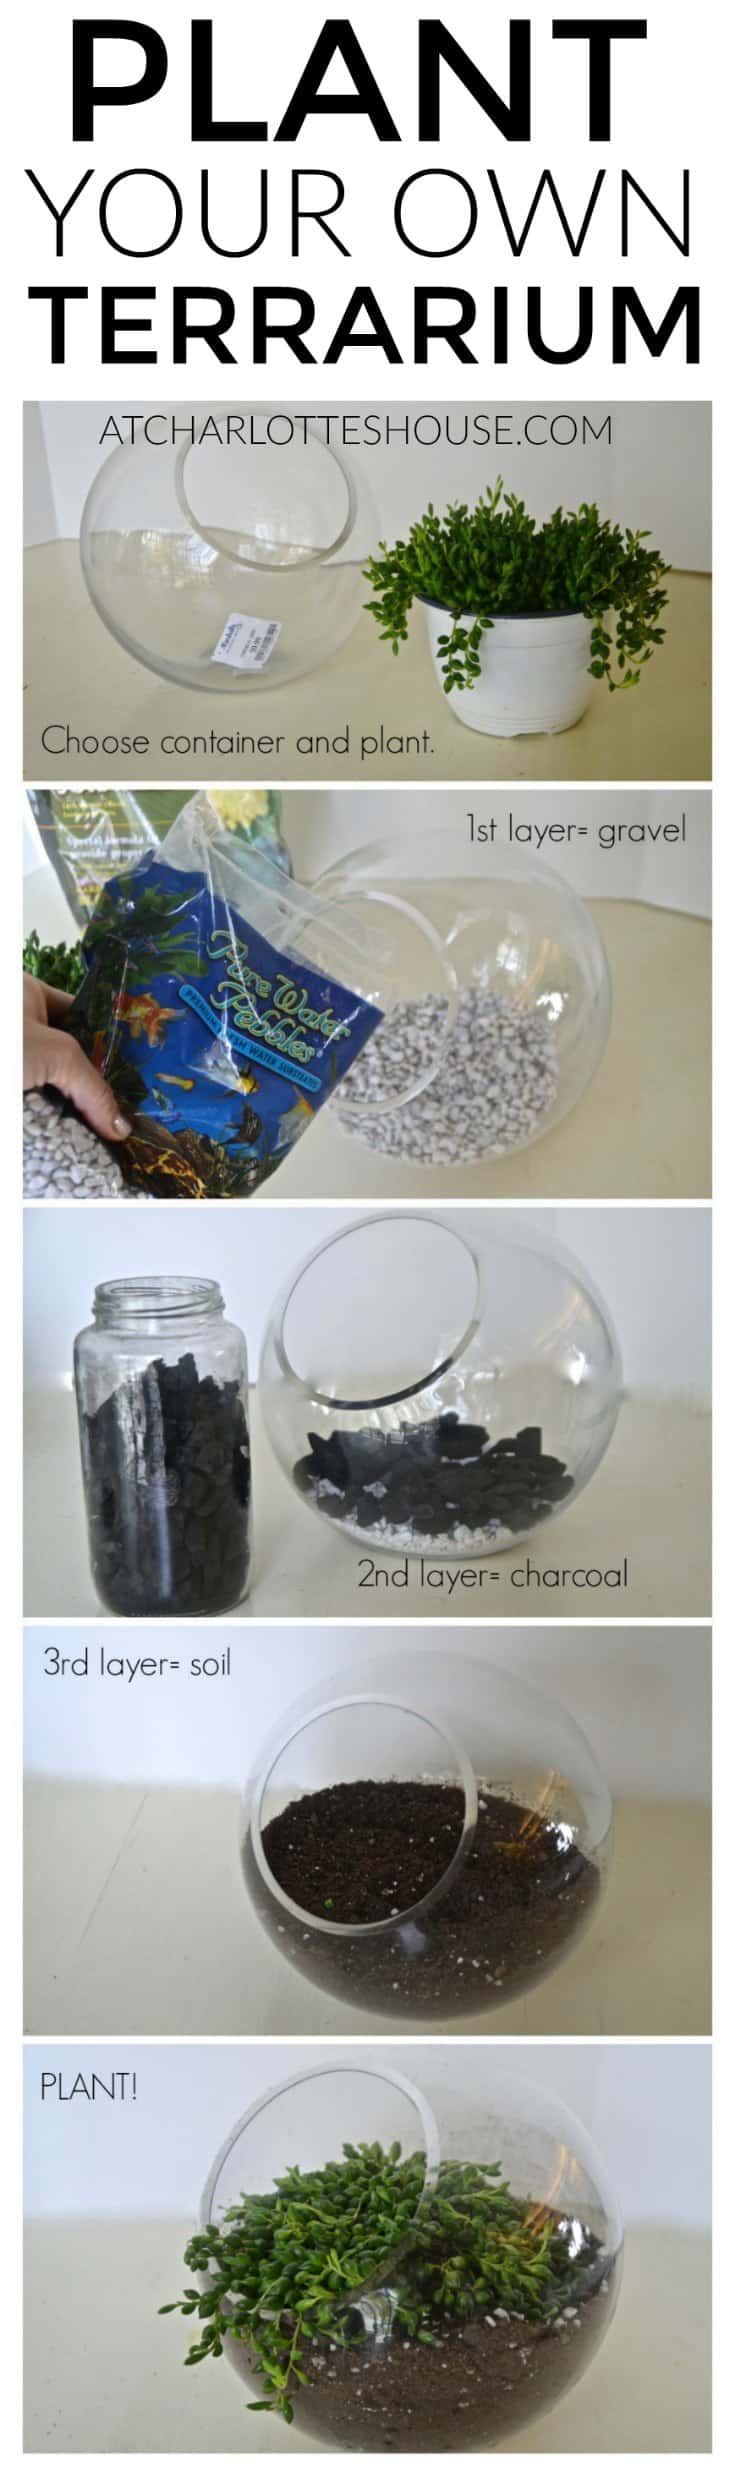 Easy tips to plant a healthy and hearty terrarium... super helpful!